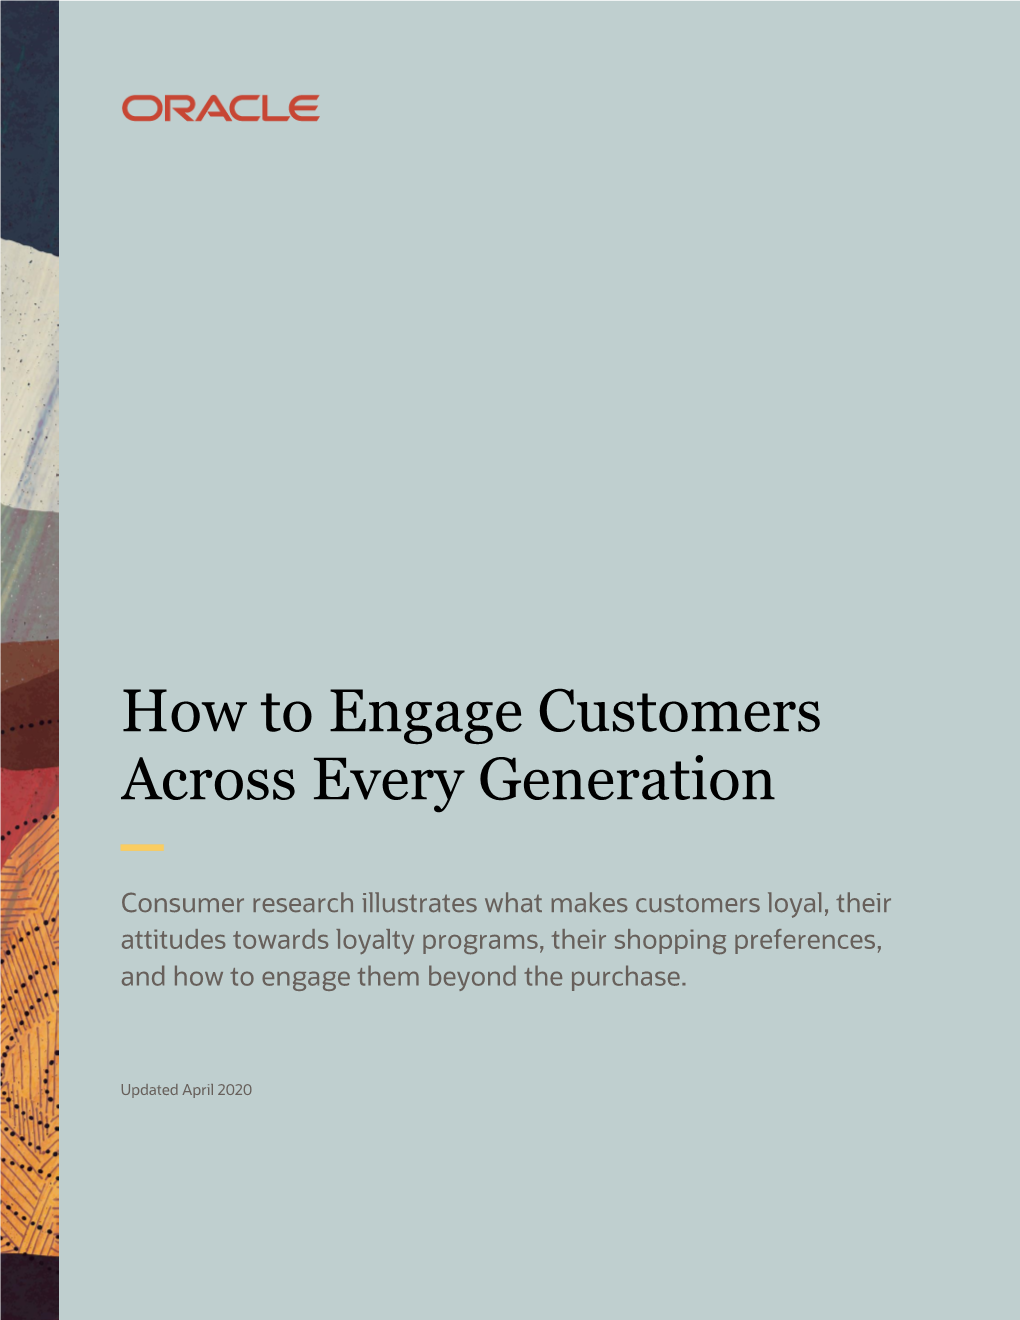 How to Engage Customers Across Every Generation